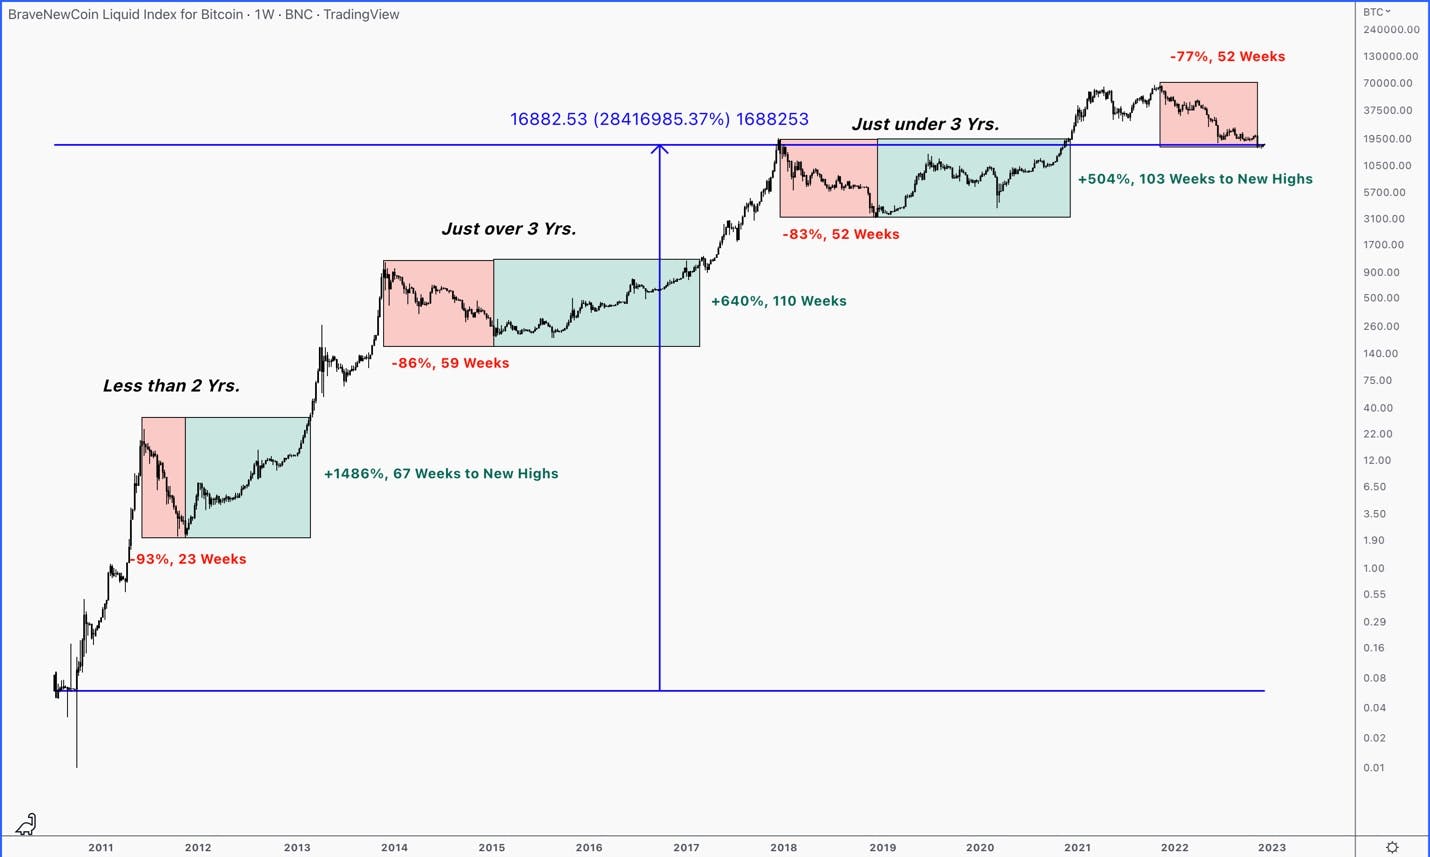 history of bitcoin's all-time high tradingview chart